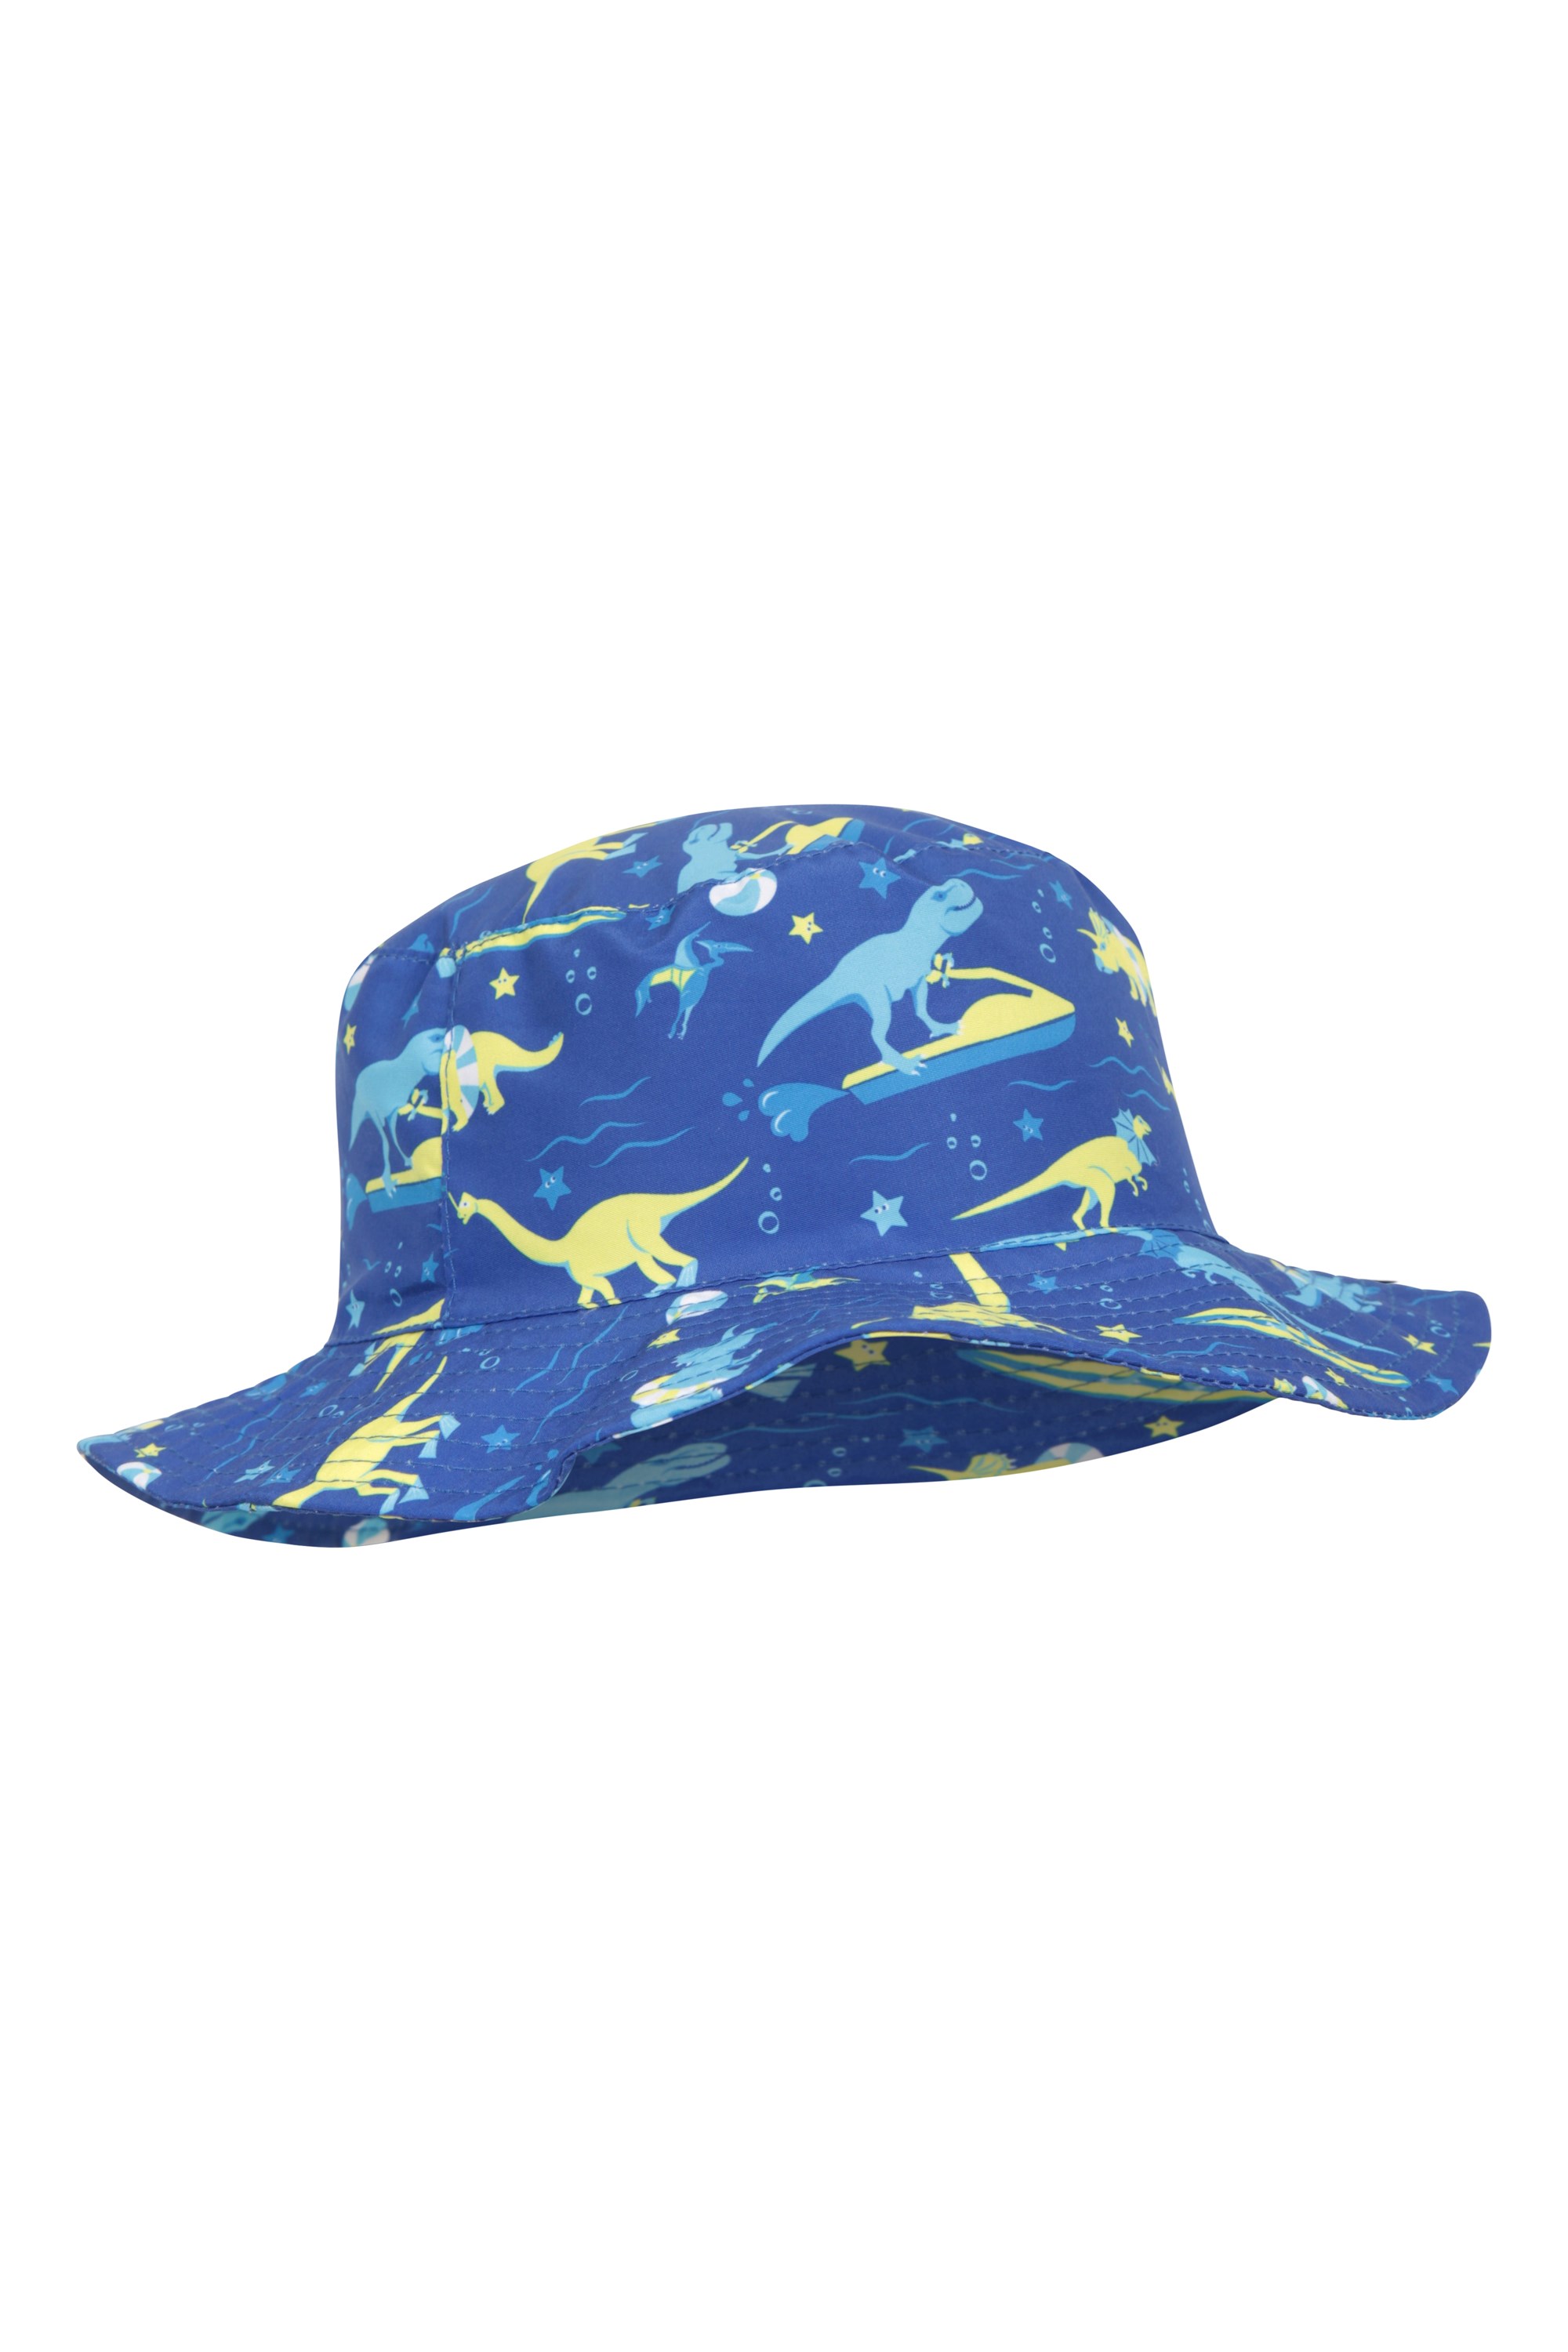 Mountain Warehouse Printed Kids Water-Resistant Bucket Hat - Blue | Size S